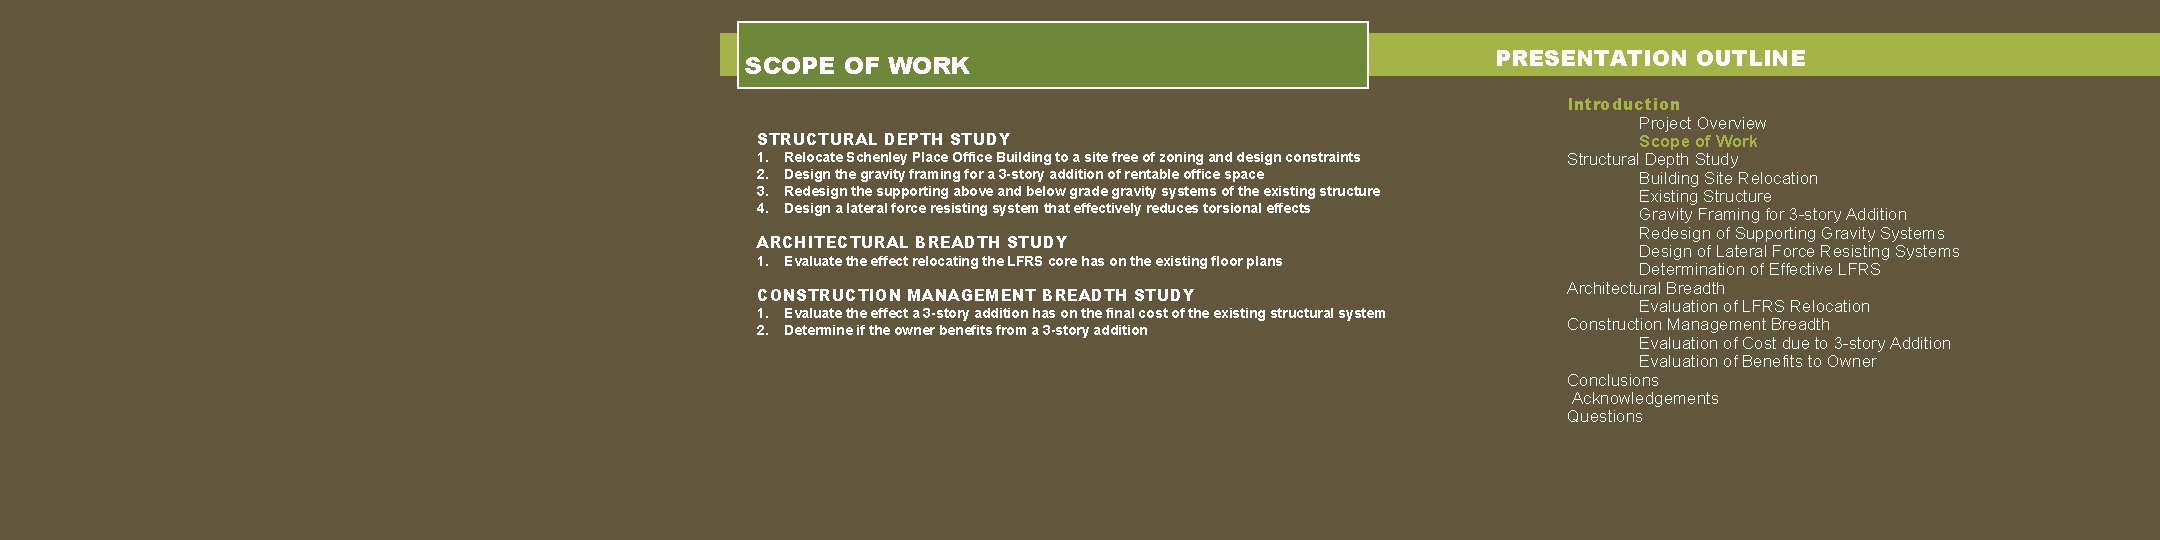 SCOPE OF WORK STRUCTURAL DEPTH STUDY 1. 2. 3. 4. Relocate Schenley Place Office